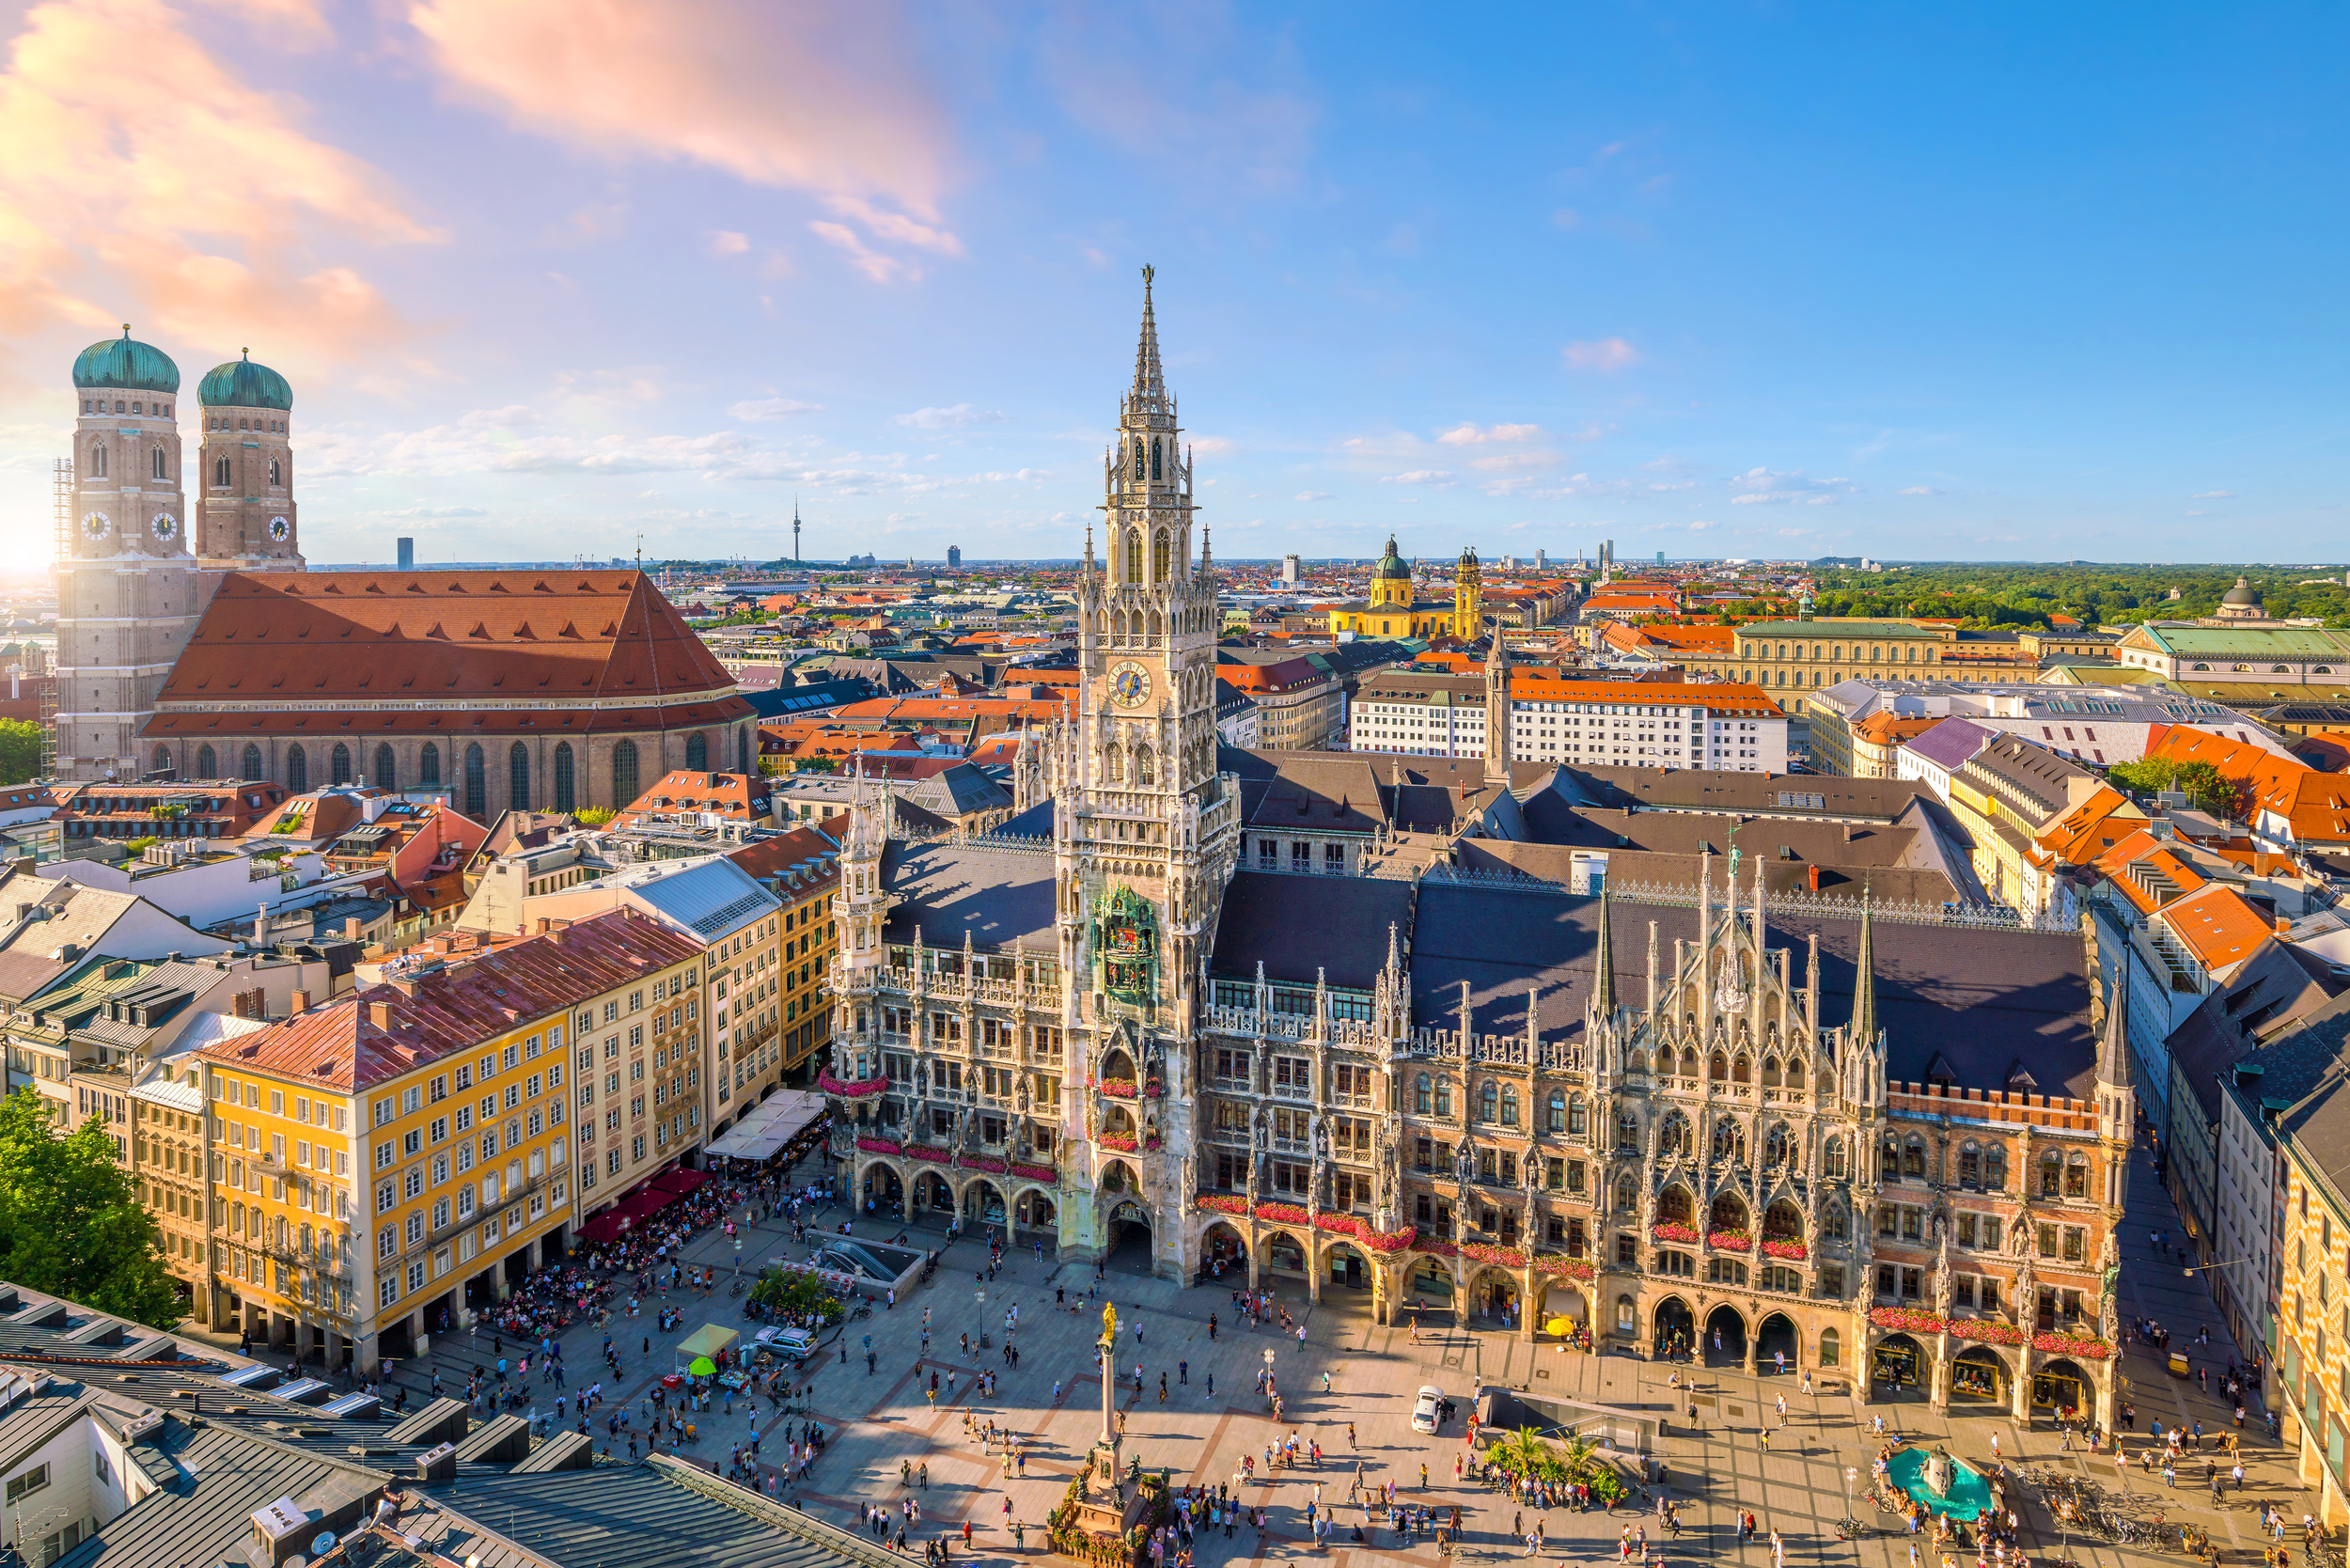 <p>The biggest city in Bavaria is a sprawling center of grandeur and parks. Thus, there’s no better way to explore than by foot. Additionally, there are a bunch of museums, all of which are must-visits. Plan a cultural weekend that also has a bit of exercise in Munich!</p><p><a href='https://www.msn.com/en-us/community/channel/vid-cj9pqbr0vn9in2b6ddcd8sfgpfq6x6utp44fssrv6mc2gtybw0us'>Follow us on MSN to see more of our exclusive lifestyle content.</a></p>